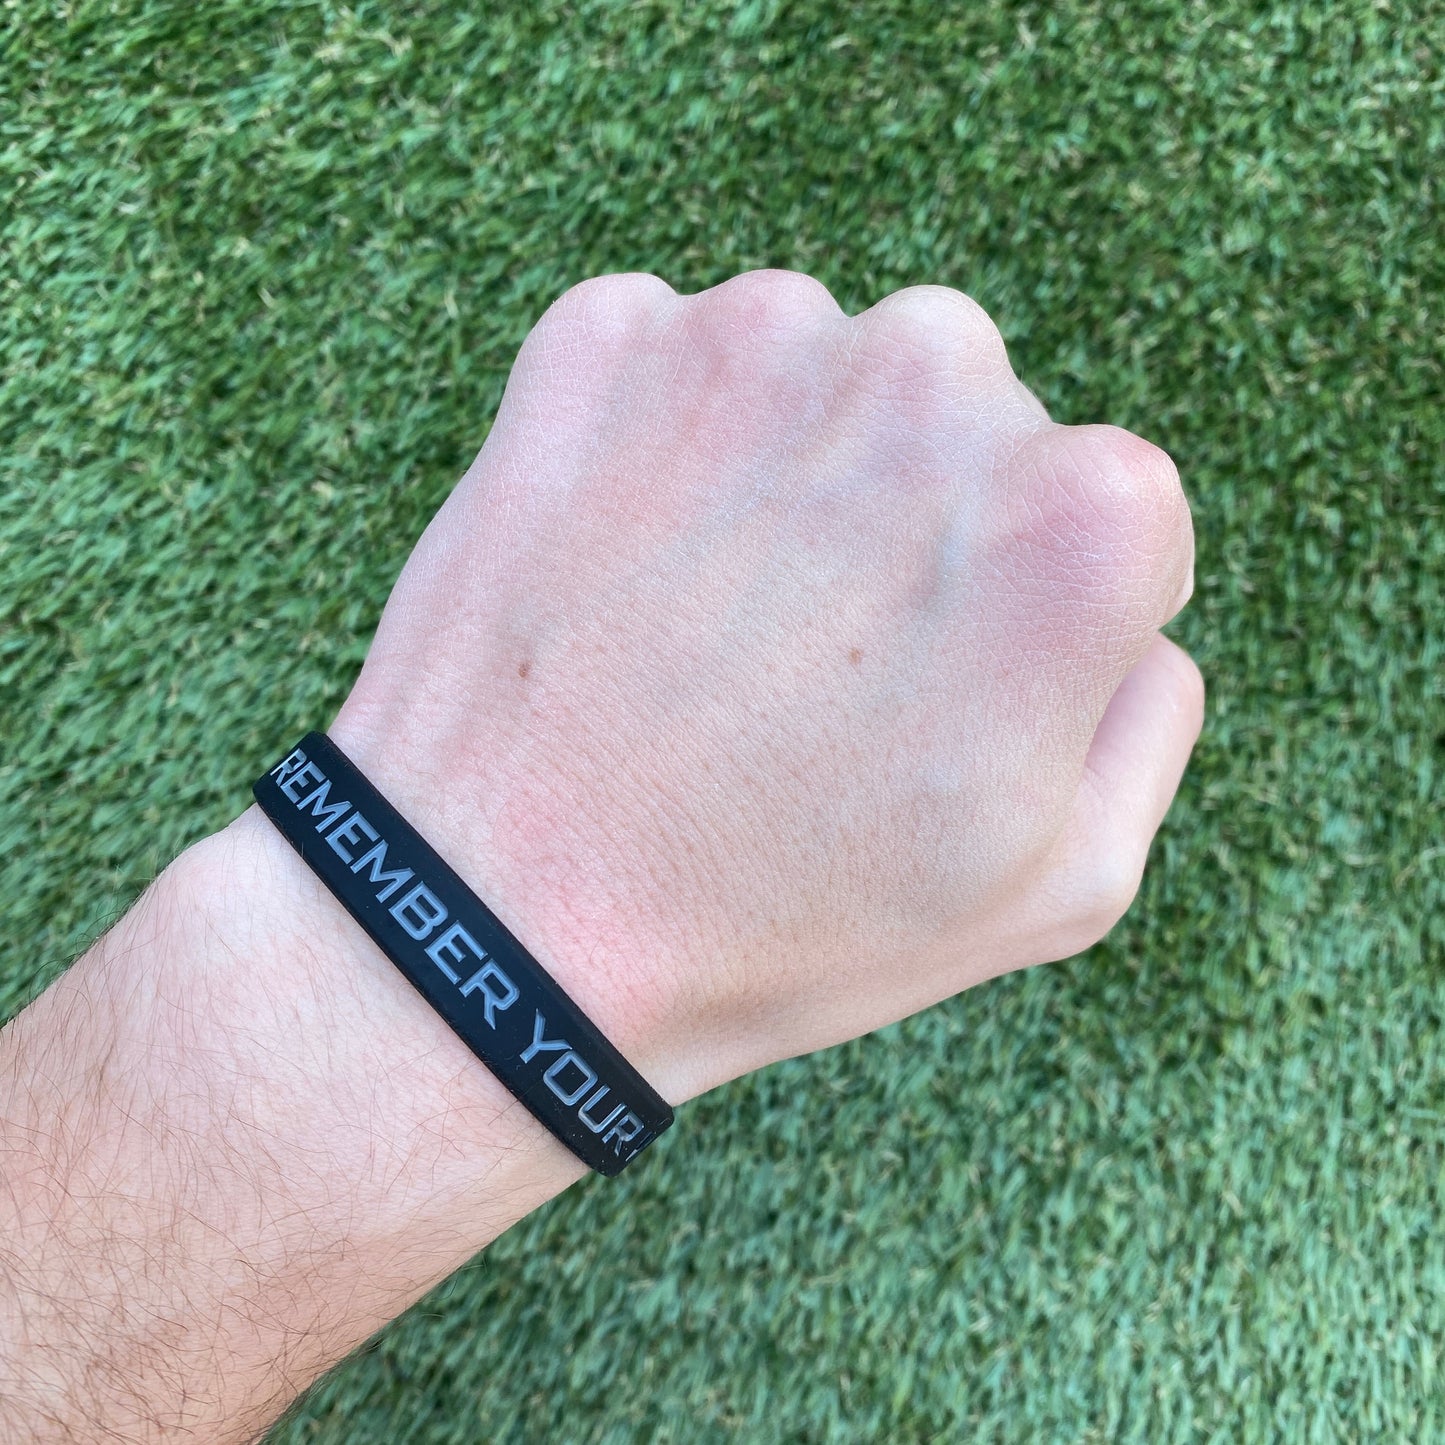 REMEMBER YOUR WHY Wristband - Southern Grace Creations